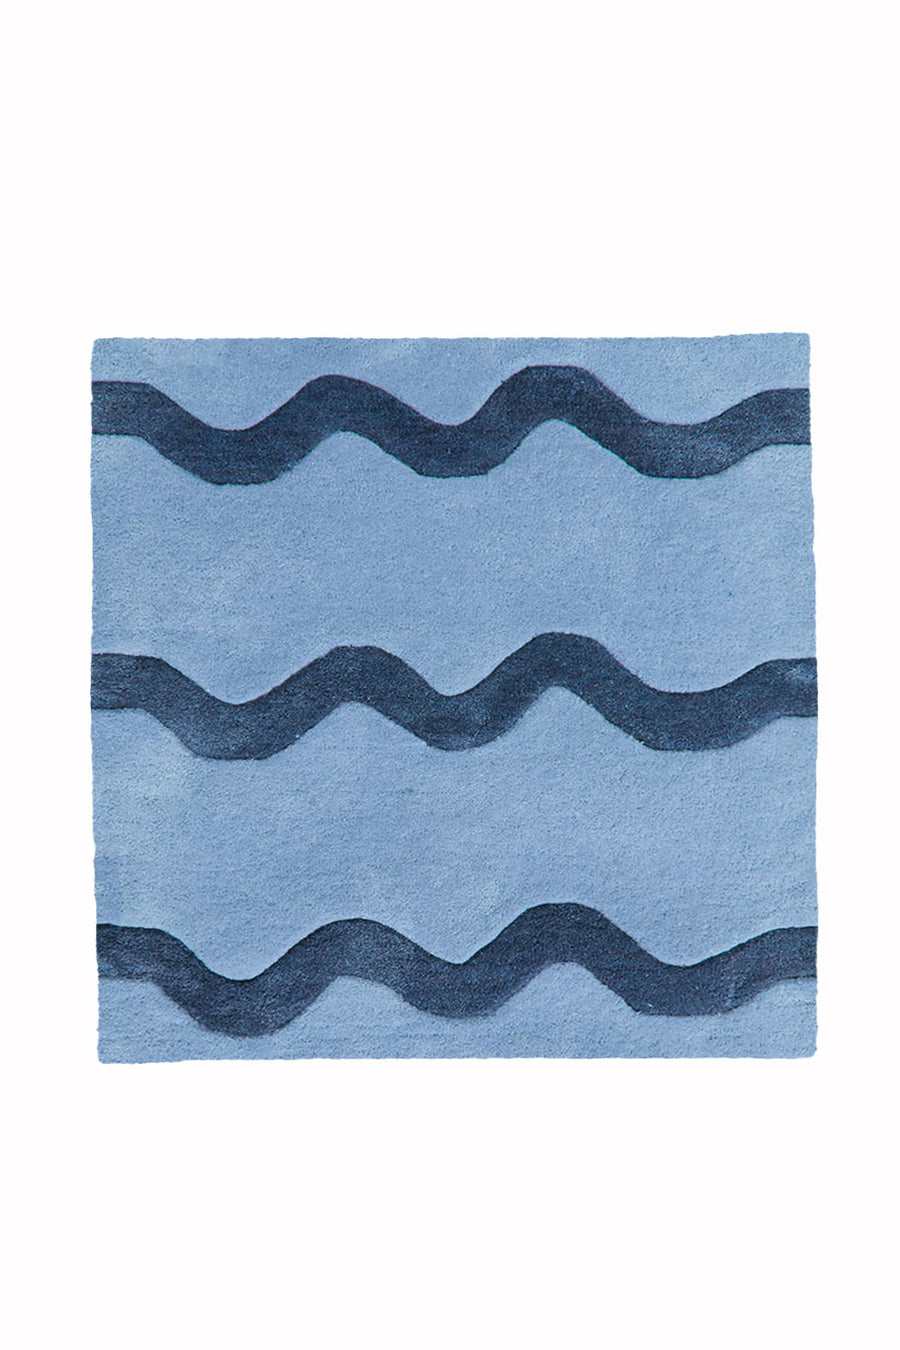 Squiggly Square Hand Tufted Wool Rug in Blue by Jubi